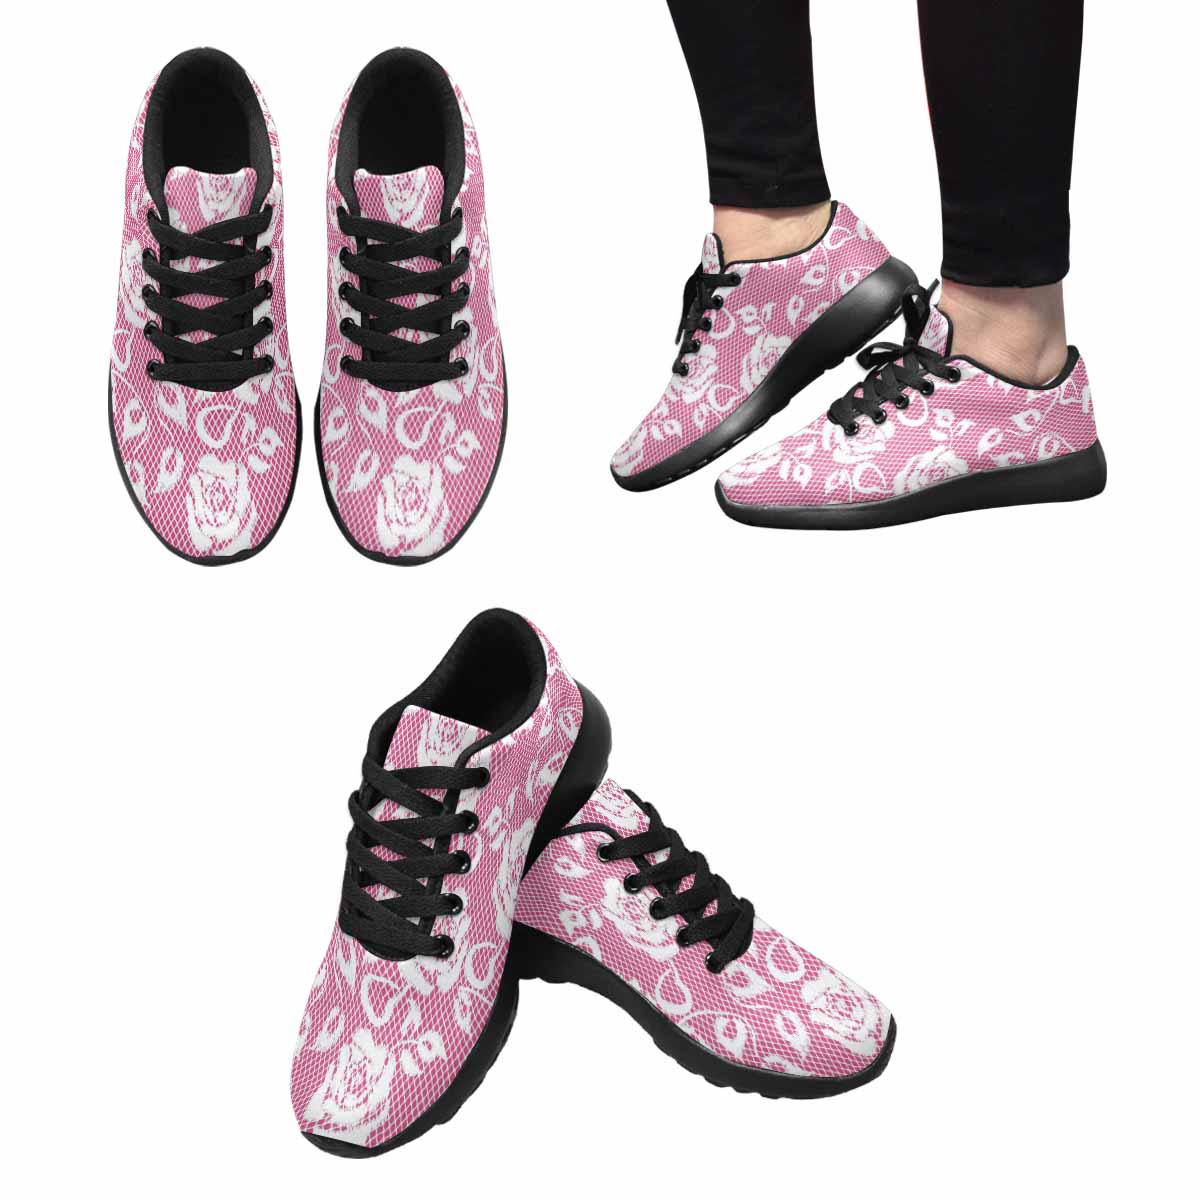 Victorian lace print, womens cute casual or running sneakers, design 17